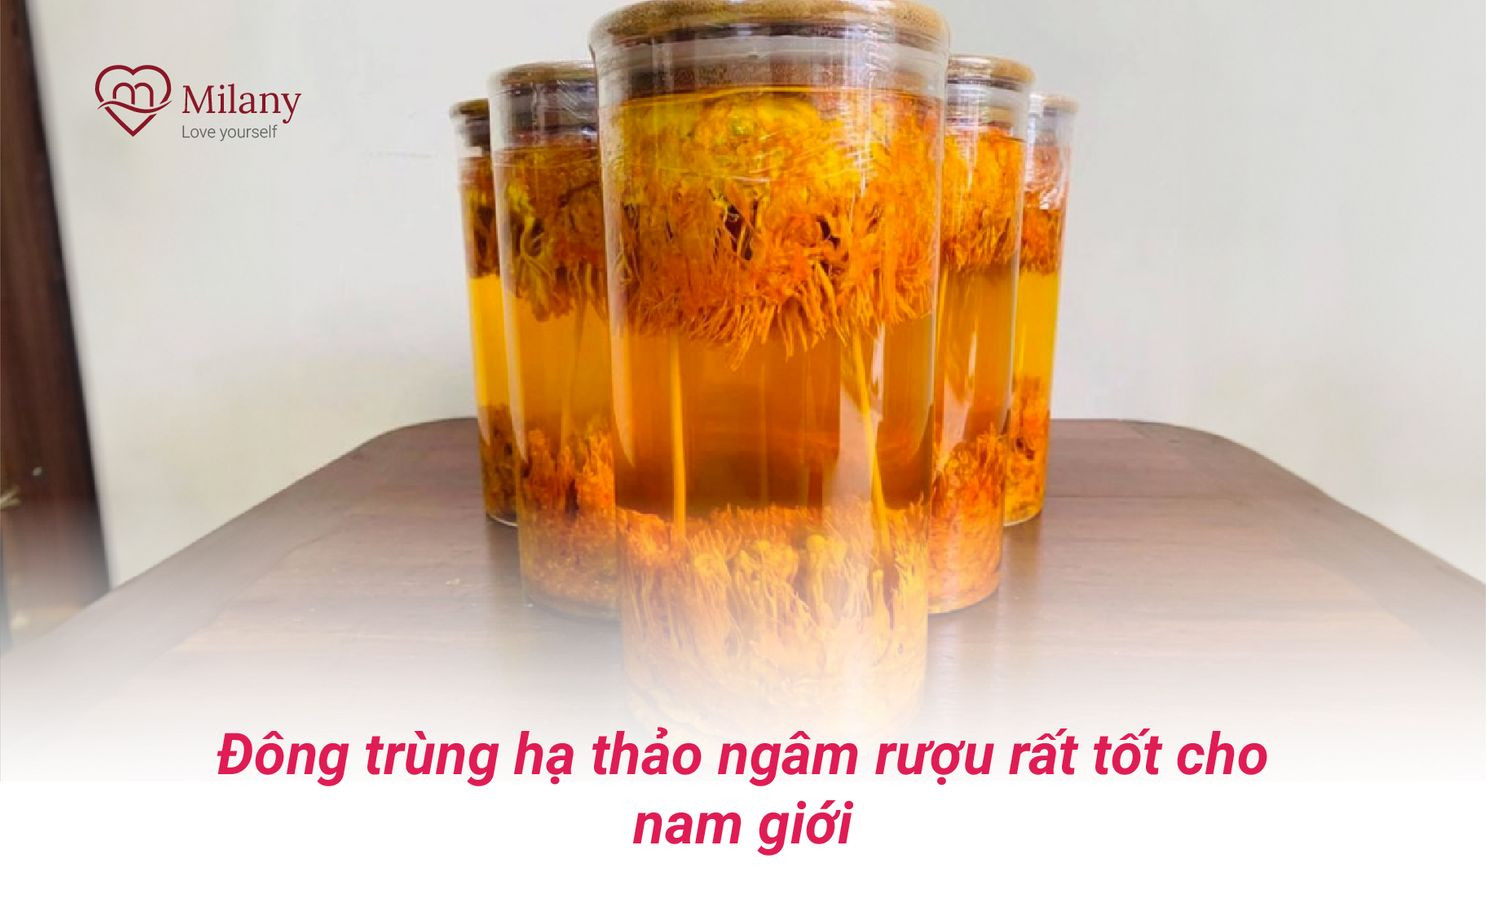 dong trung ha thao ngam ruou